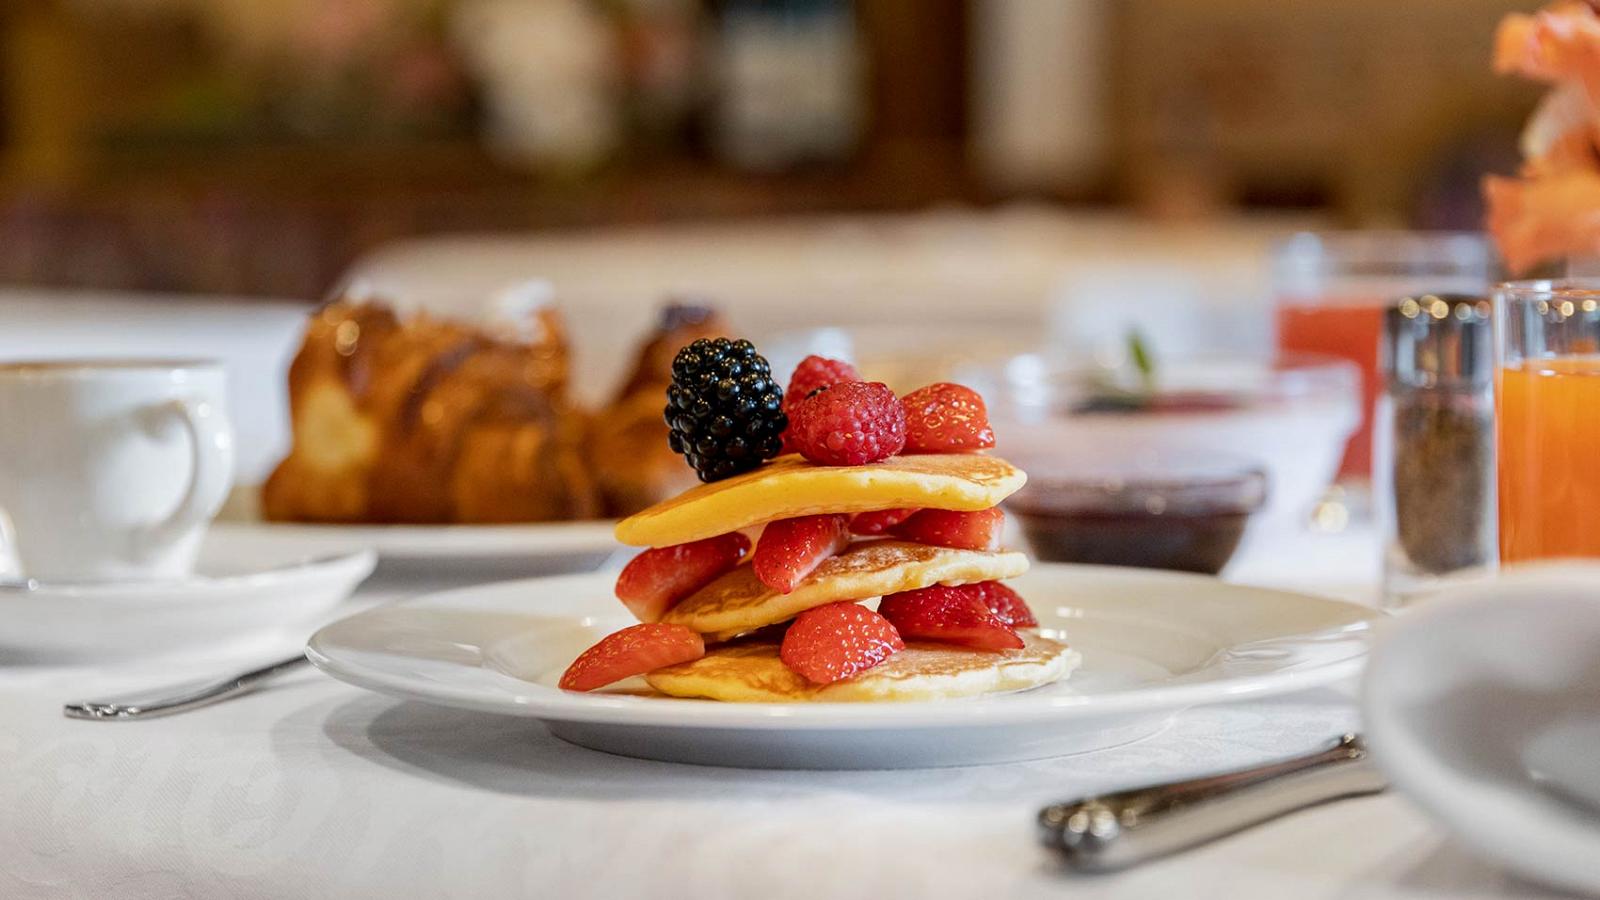 A plate of pancakes with blackberries and strawberries made at the Hotel La Serenella